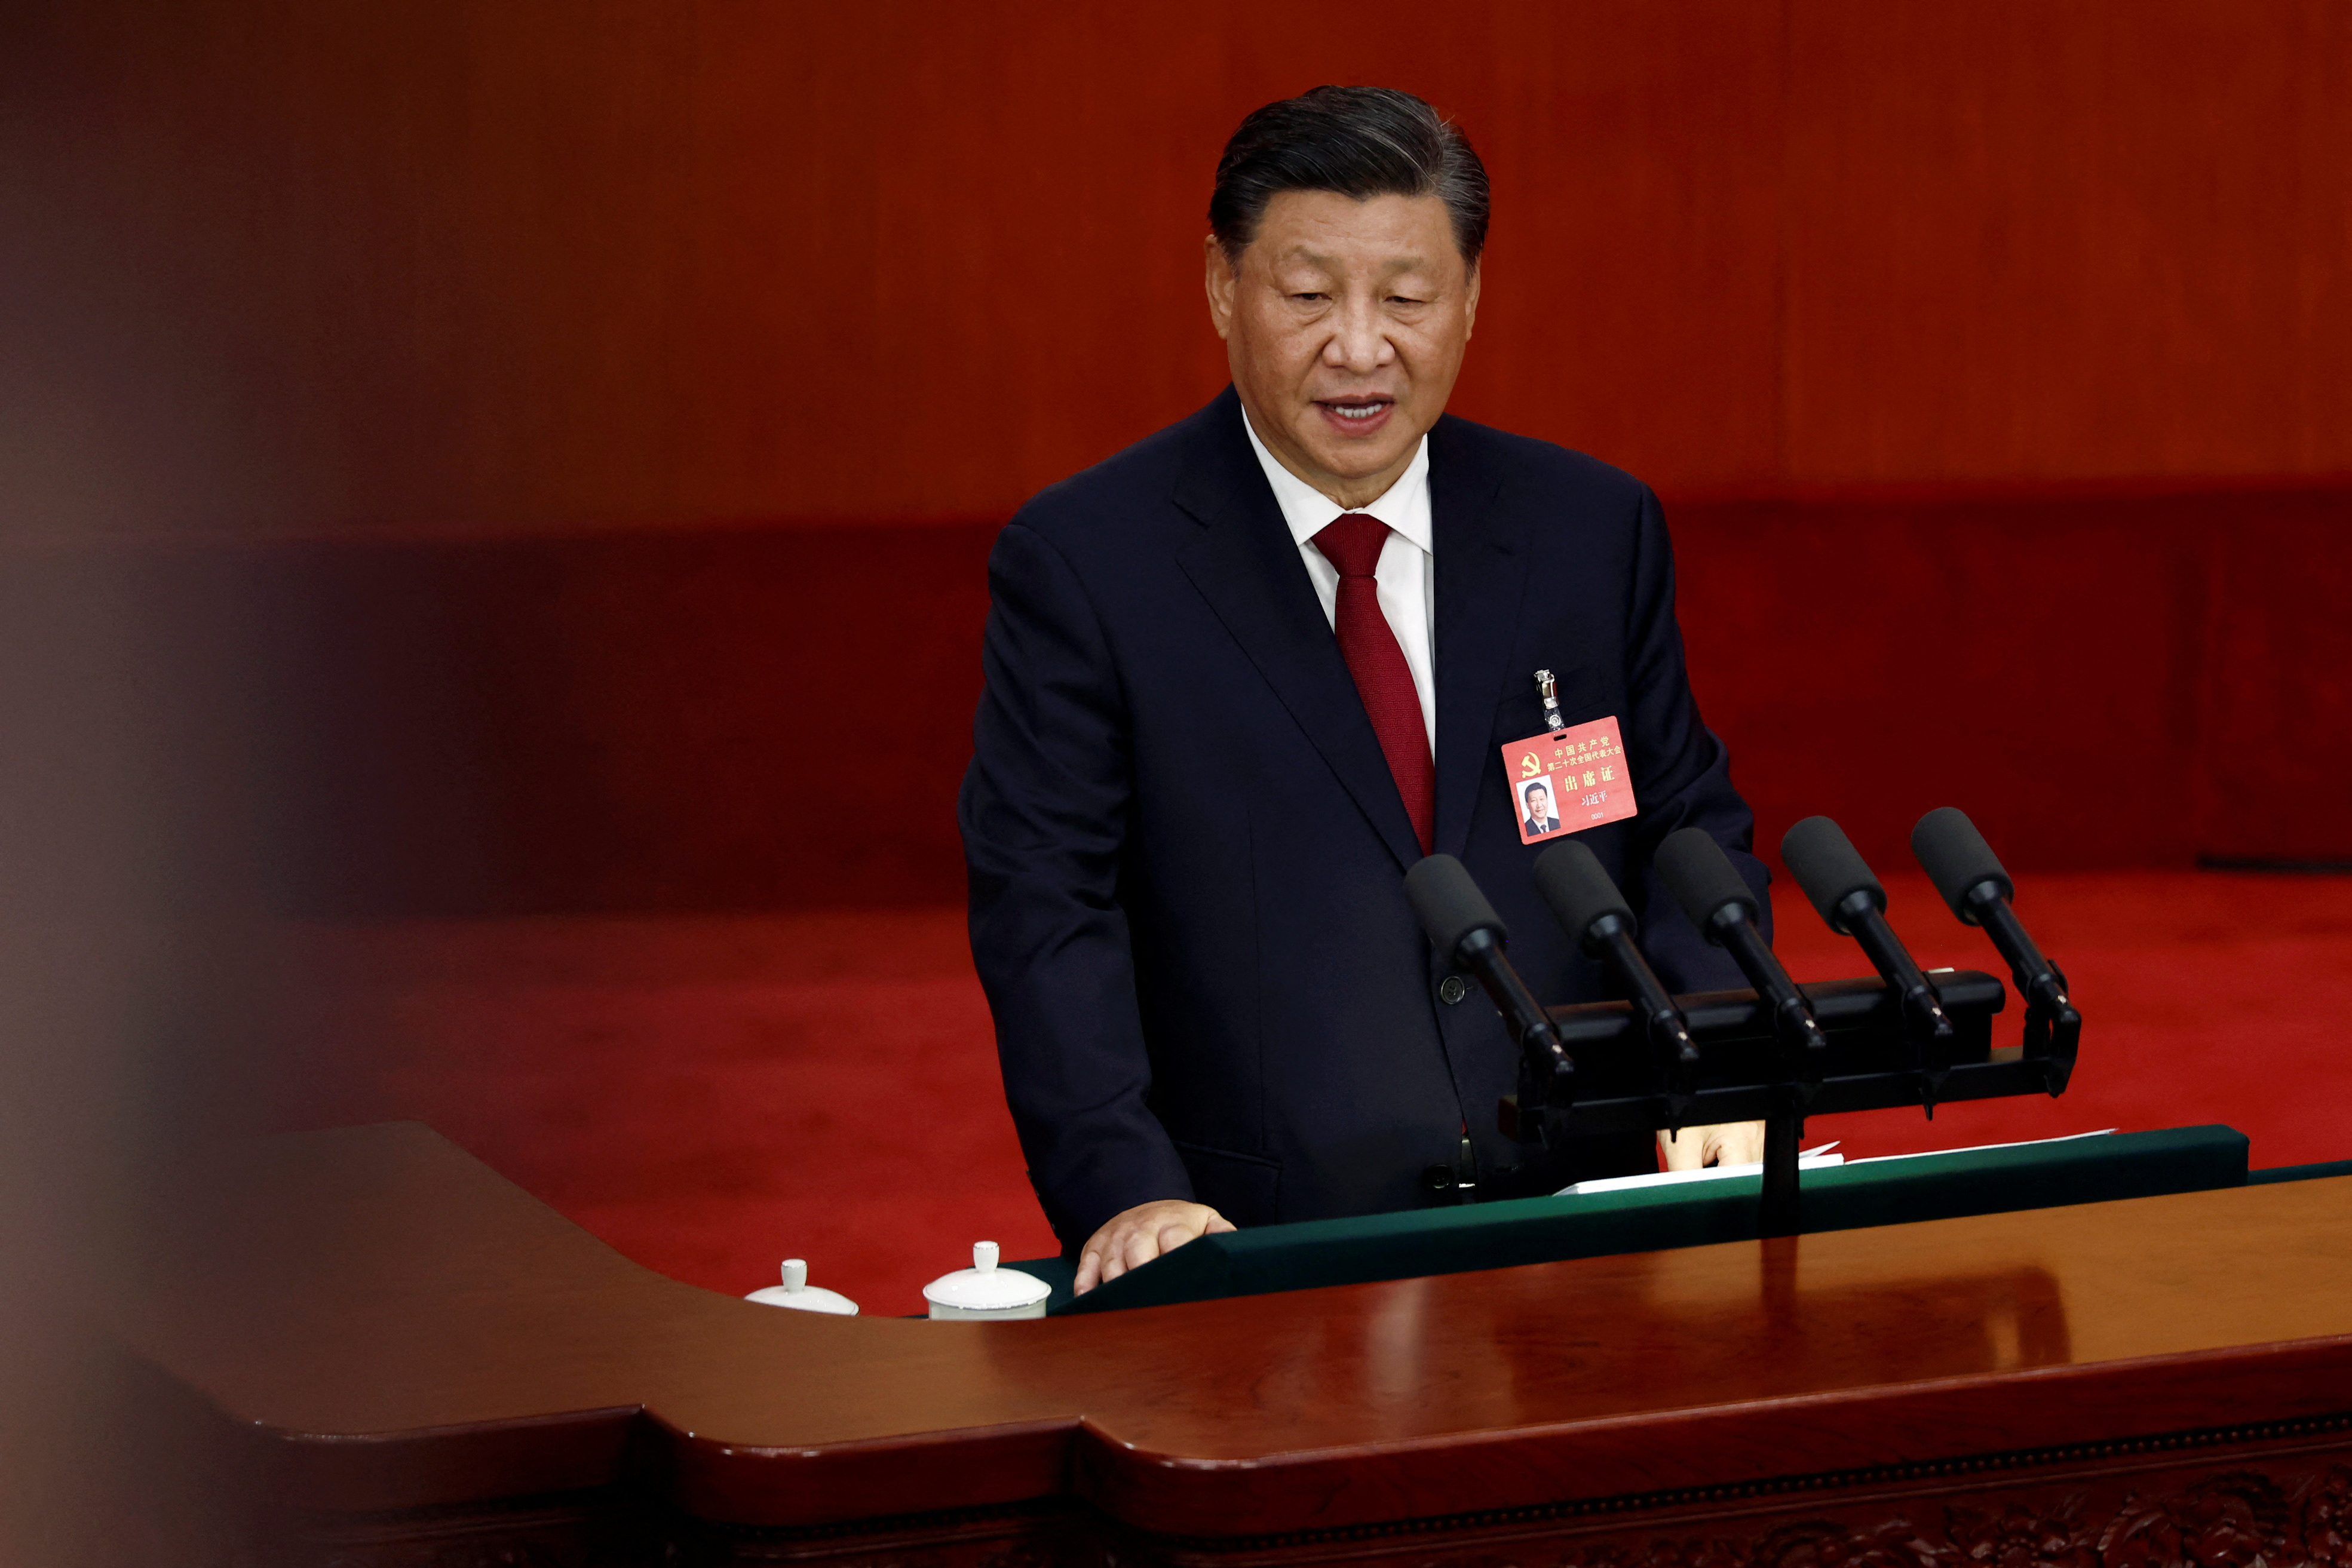 Chinese President Xi Jinping speaks during the opening ceremony of the 20th National Congress of the Communist Party of China, at the Great Hall of the People in Beijing on October 16.